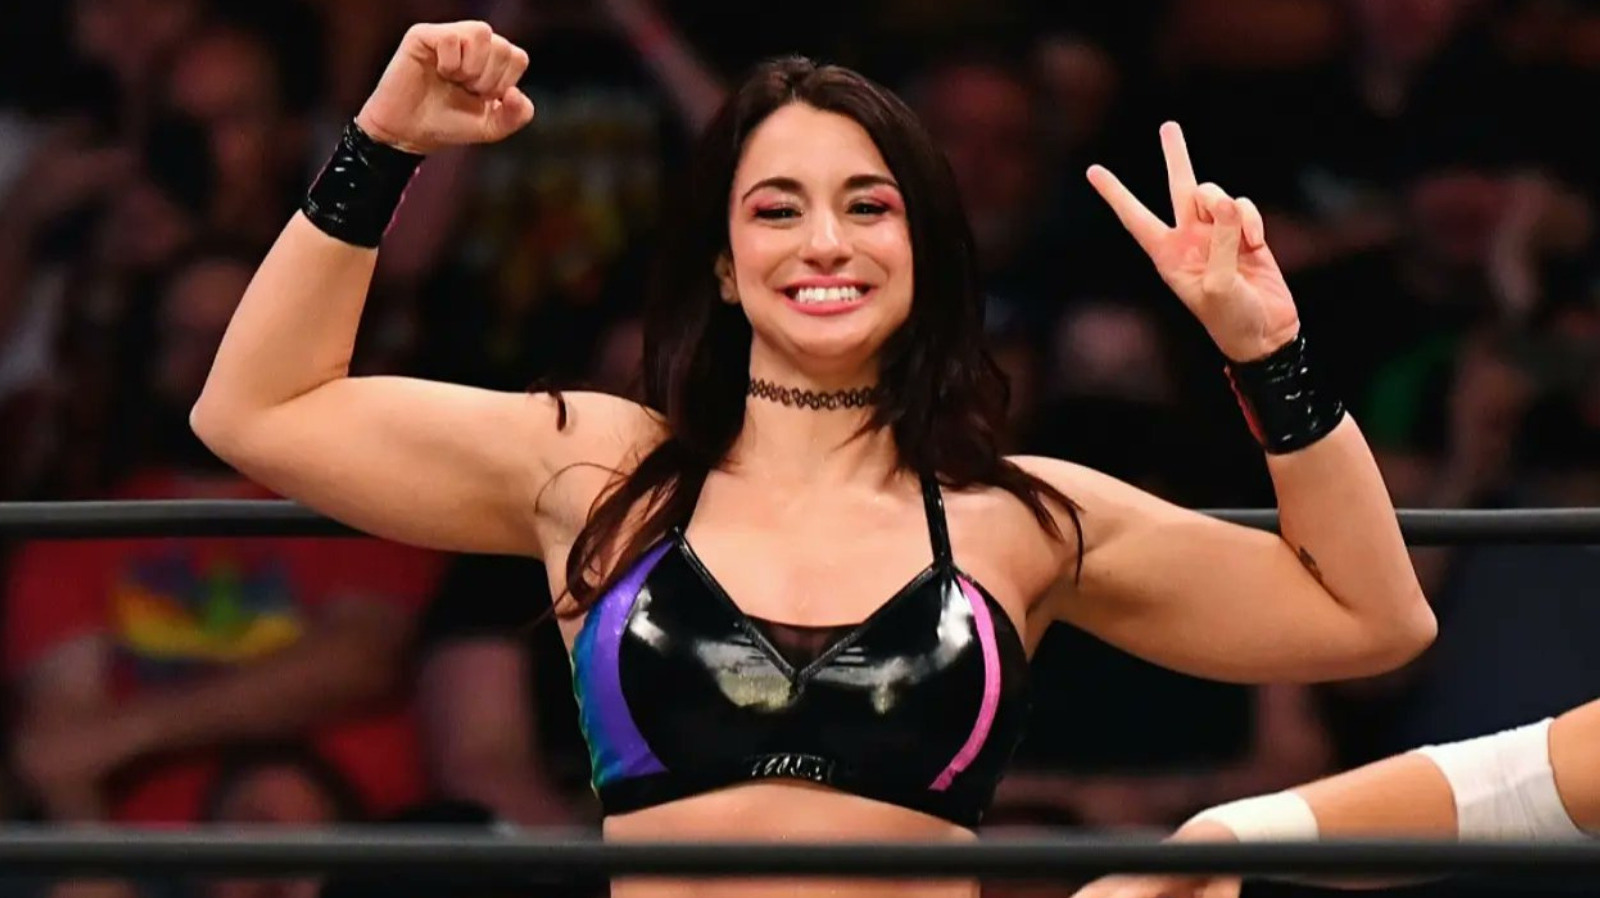 AEW's Kayla Sparks Reveals The Moment She's Most Proud Of In Her Wrestling Career